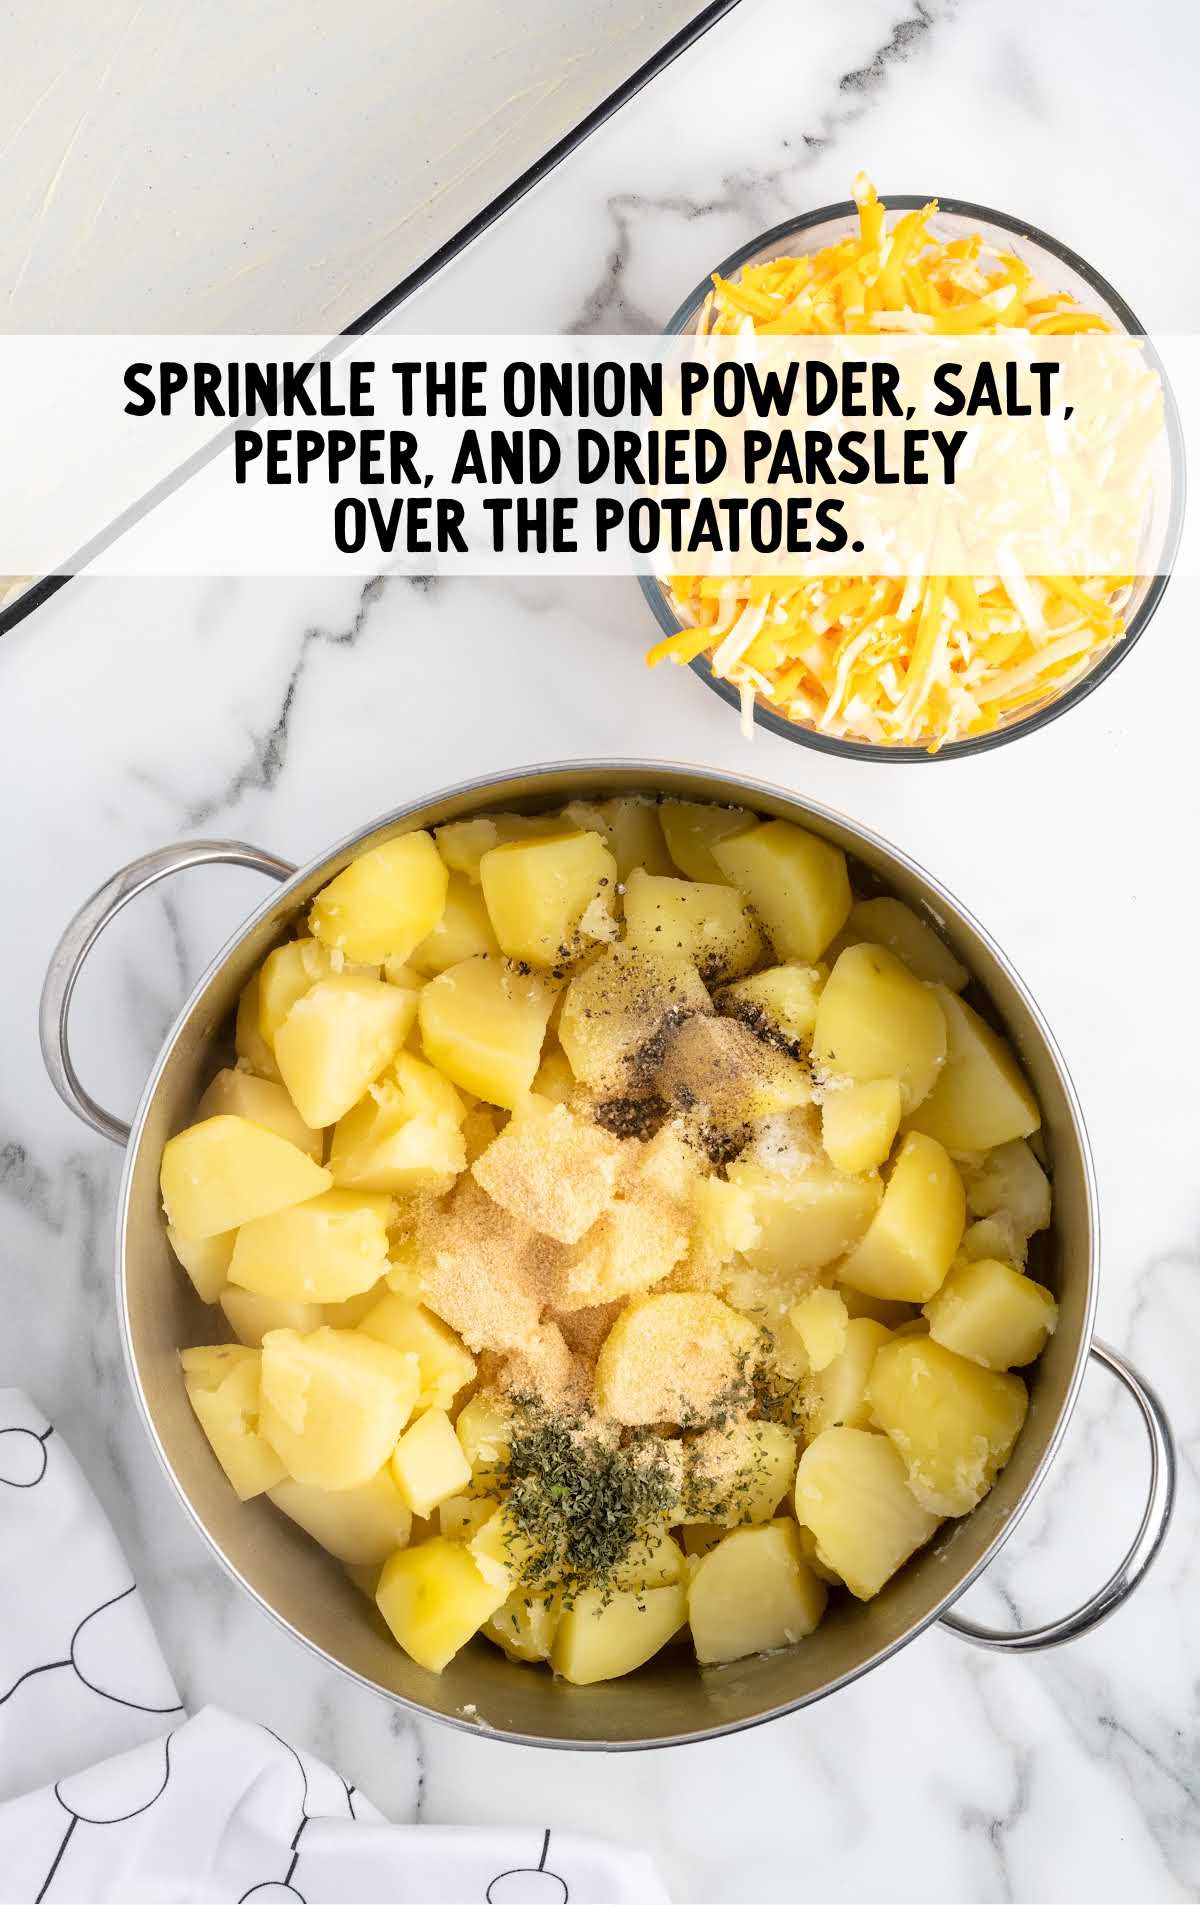 onion powder, salt, pepper, and dried parsley sprinkled over the potatoes